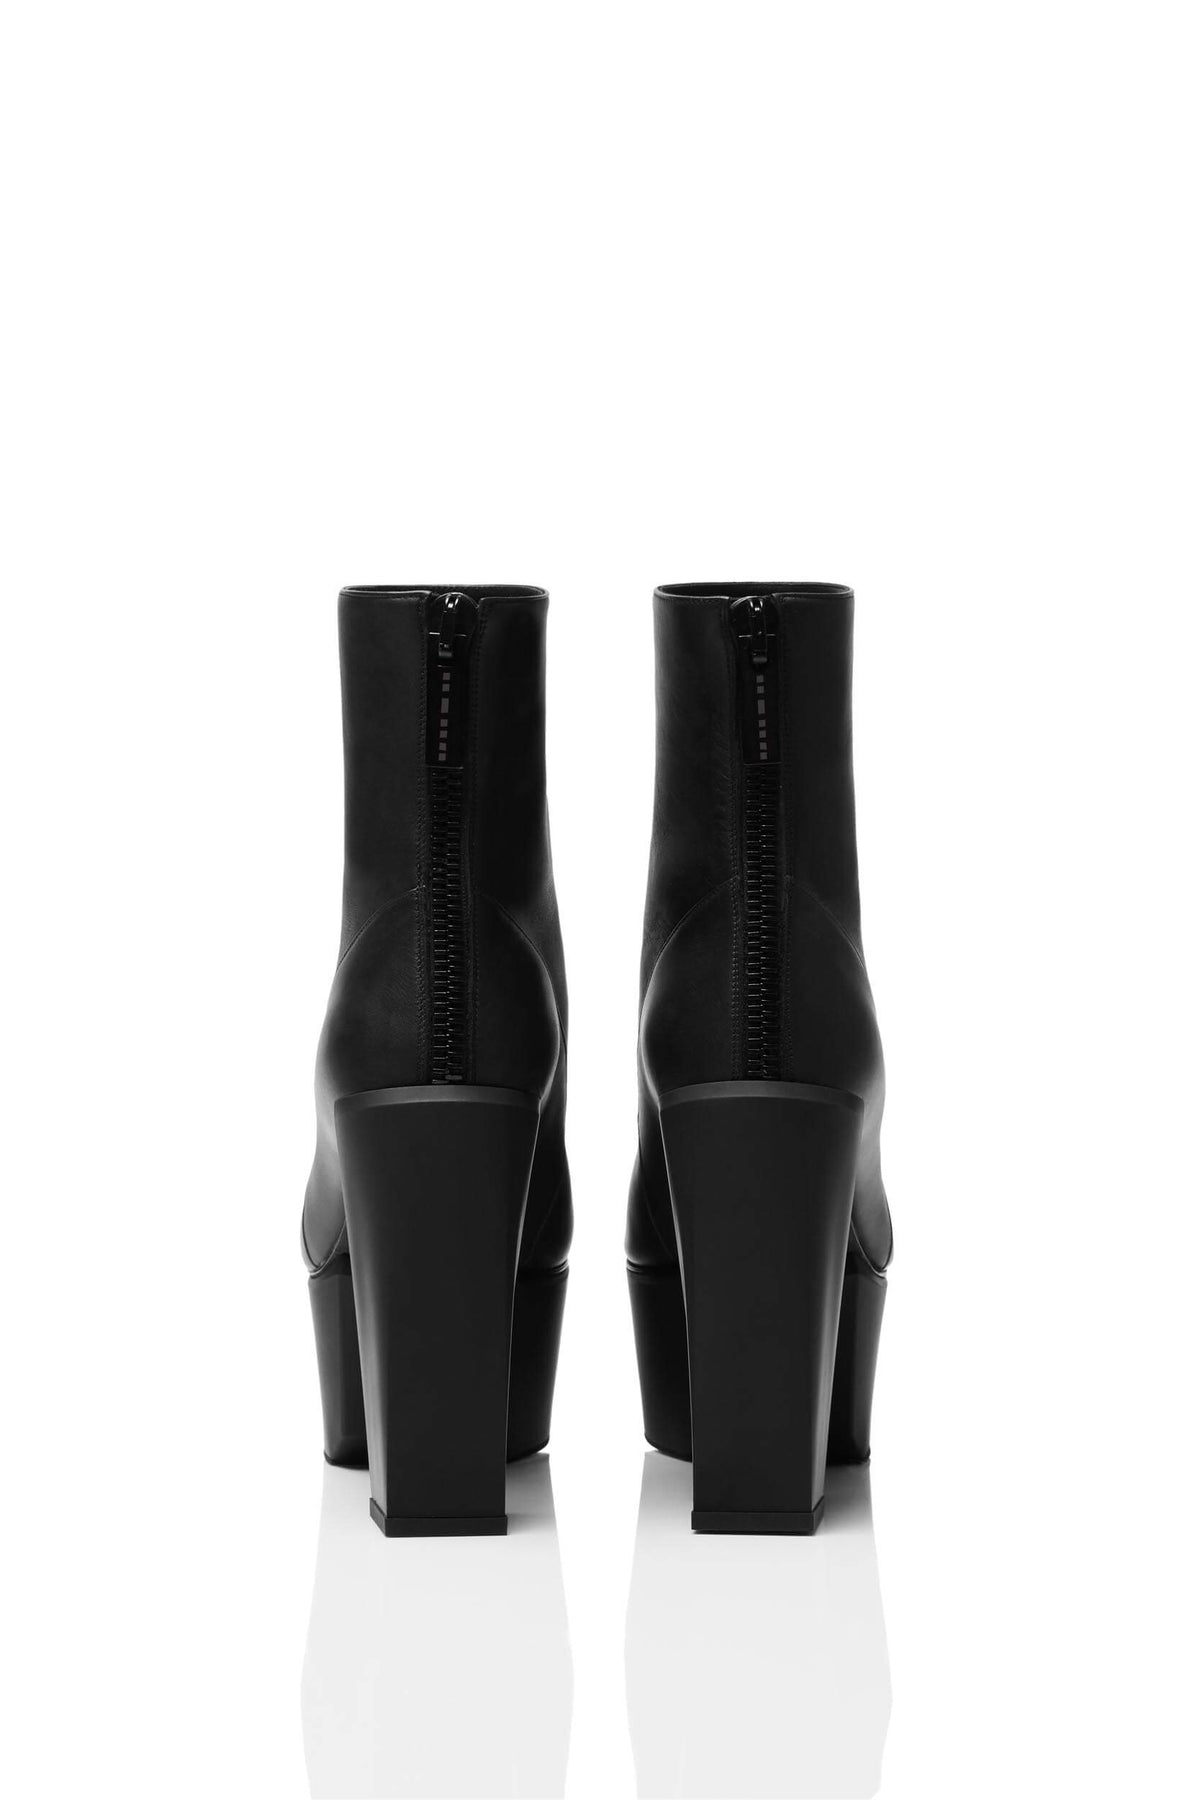 HAIKI 651 – Back zip platform boot with softly rounded toe. Finished in calf nappa in black. 